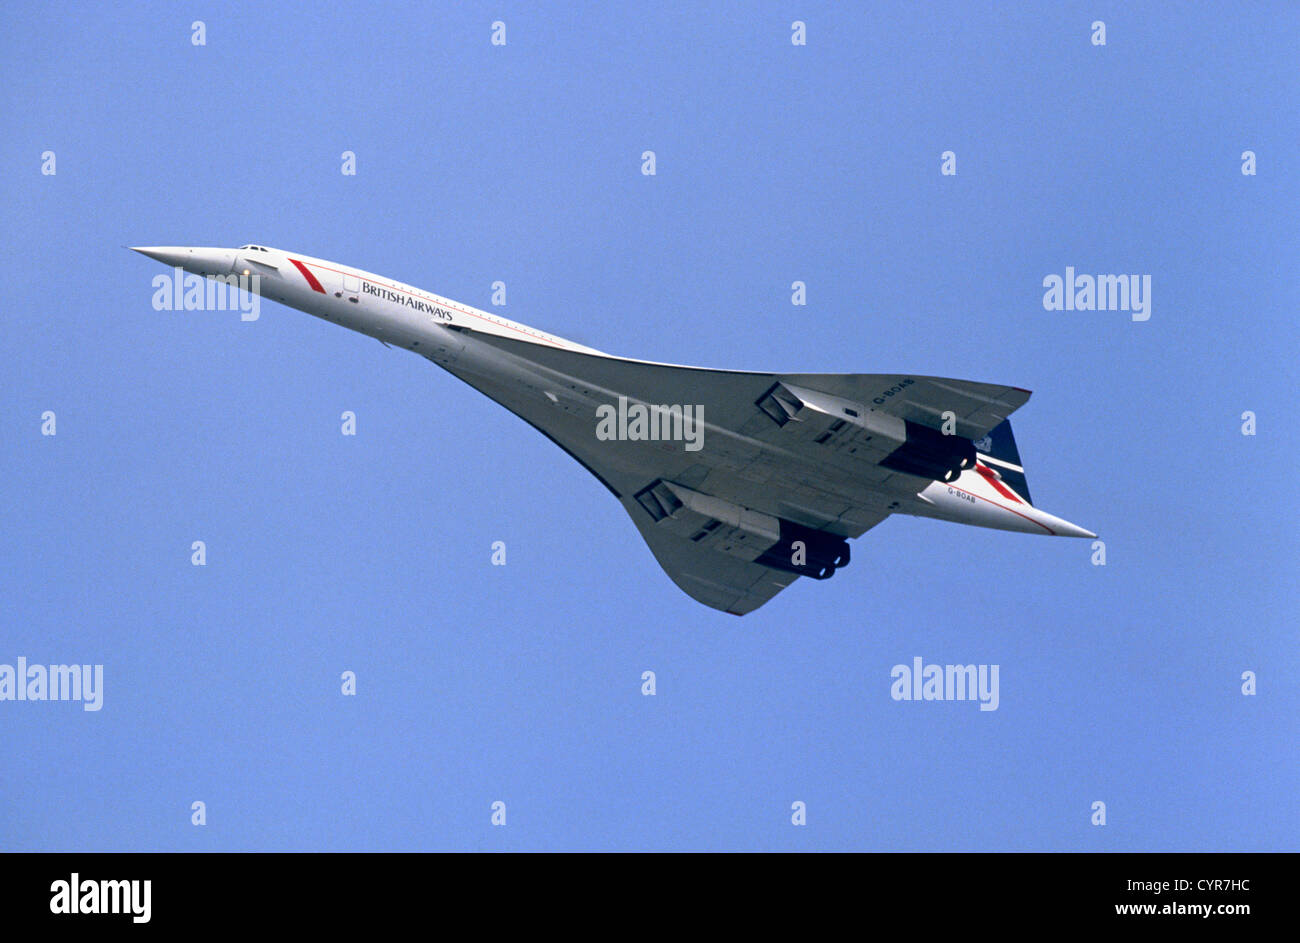 A Concorde supersonic airliner registration G-BOAB flies overhead during its service for British Airways Stock Photo